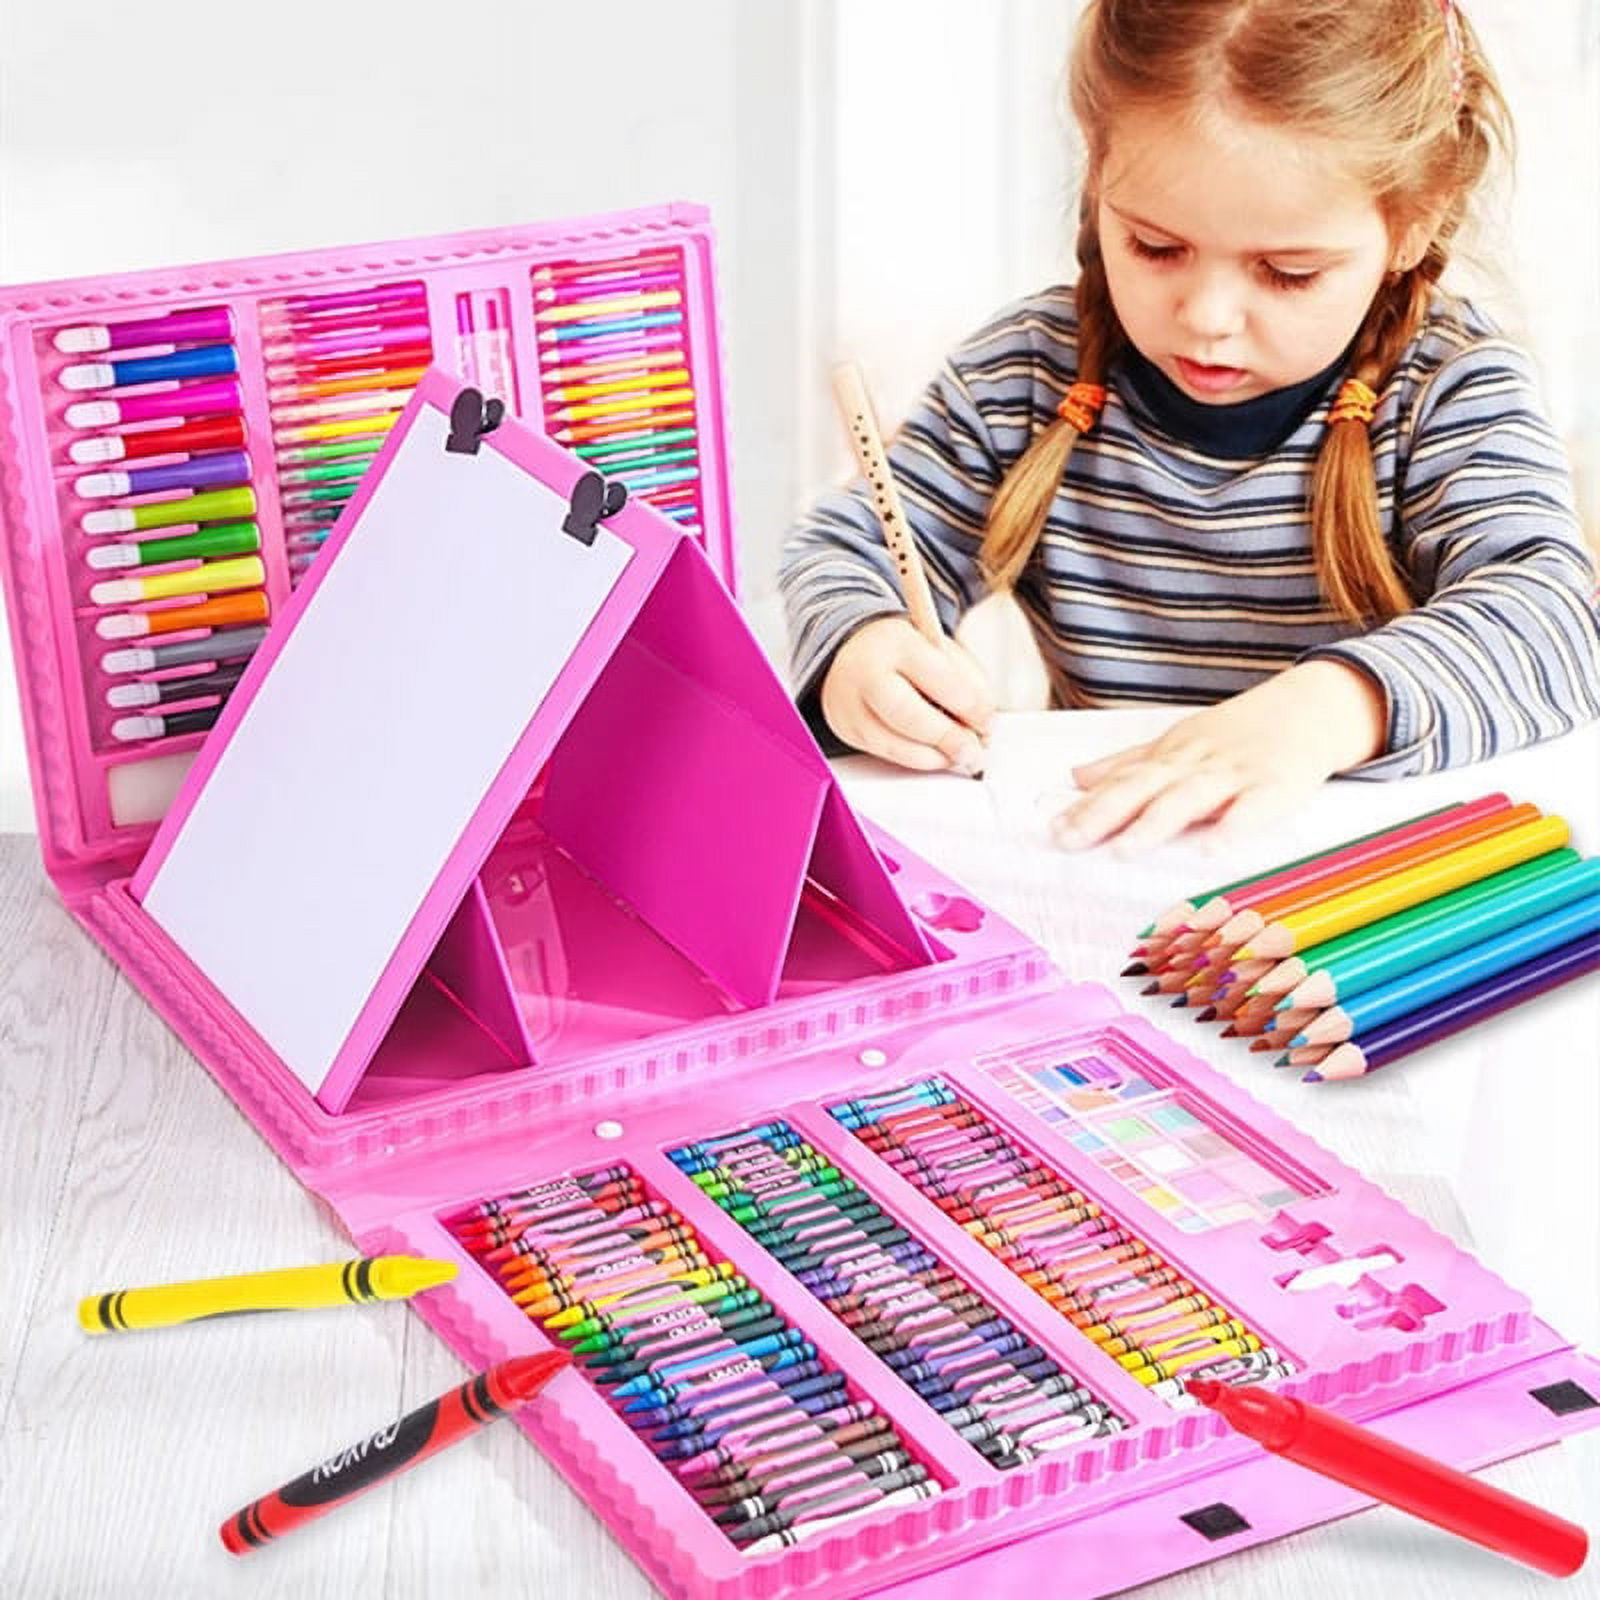 KIDDYCOLOR 85 Piece Wooden Art Set, Art Box Painting & Drawing Kit for Kids  with Oil Pastels, Colored Pencils, Watercolor Cakes, Paint Brushes, Art  Supplies for Kids, Teens, Adults, and Artist 